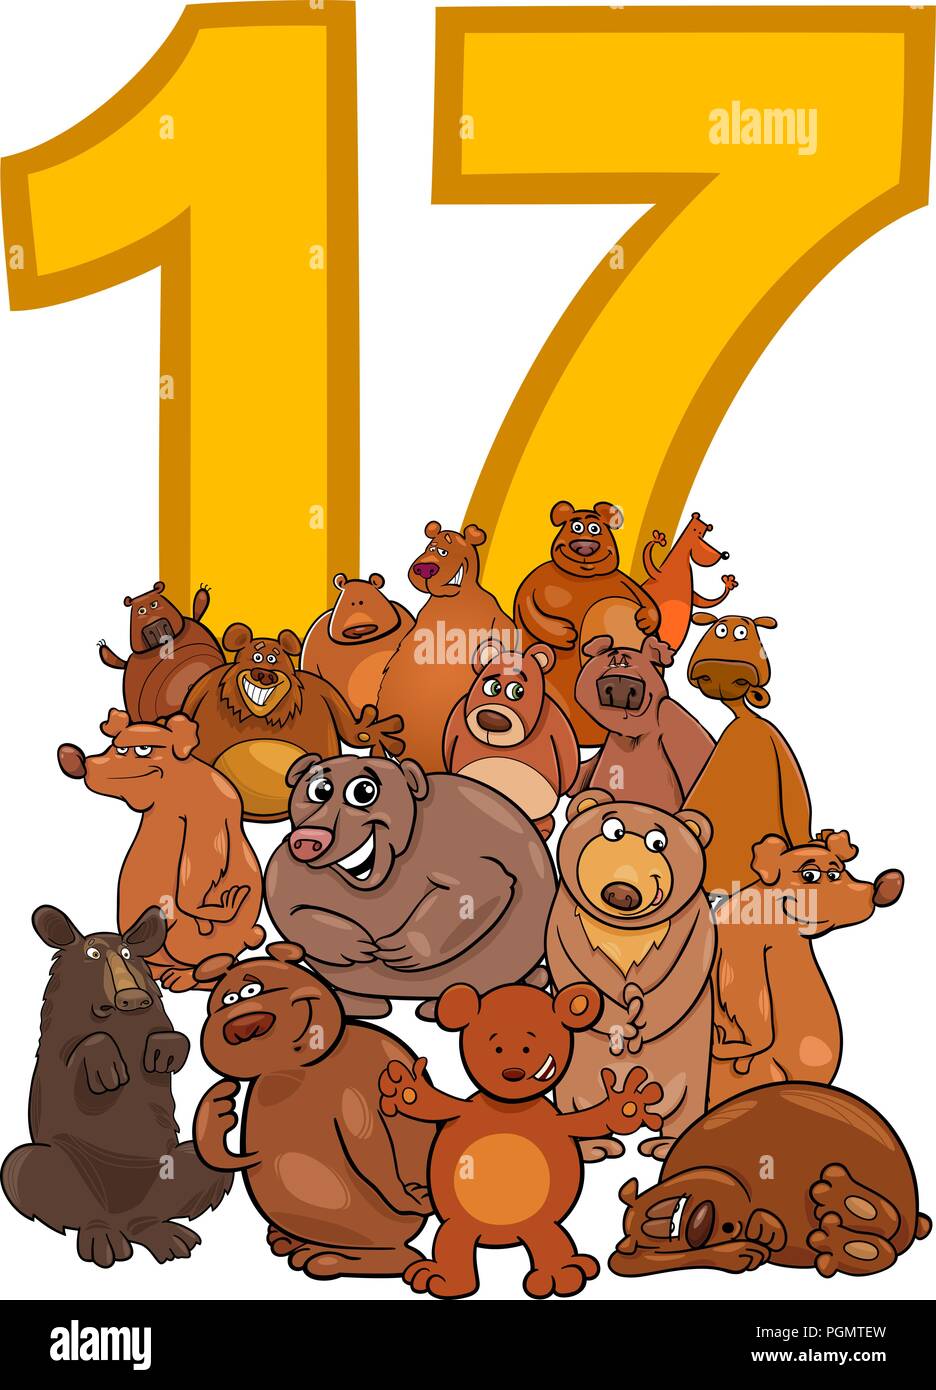 cartoon-illustration-of-number-seventeen-and-bear-characters-group-PGMTEW.jpg